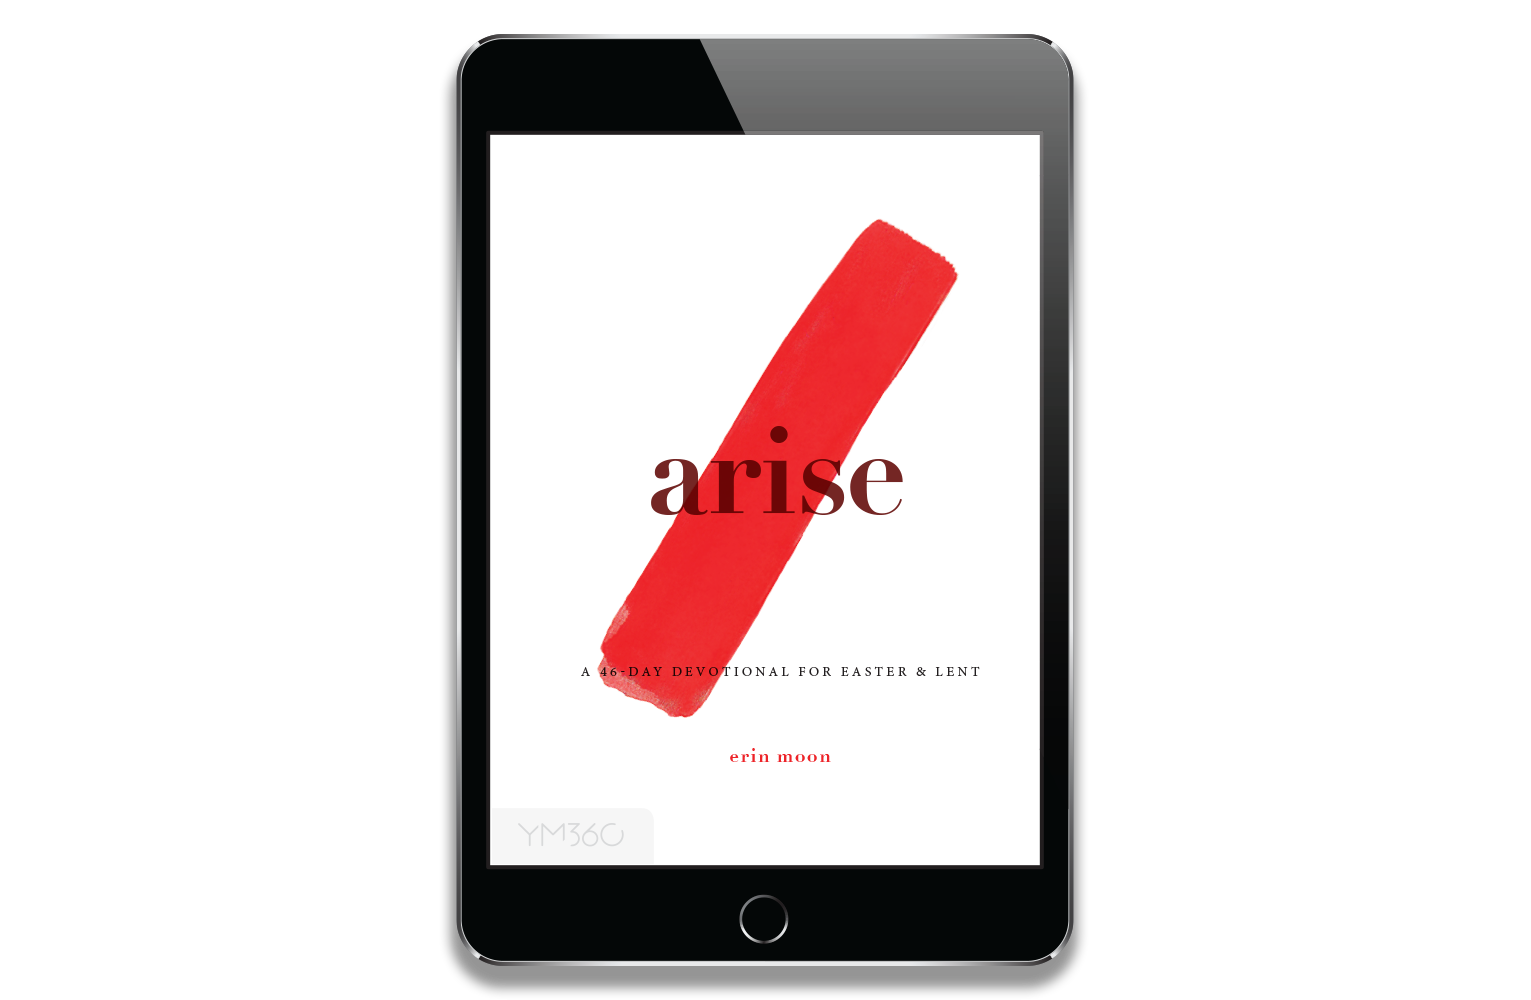 [DOWNLOADABLE VERSION] ARISE: A 46-Day Devotional for Easter & Lent